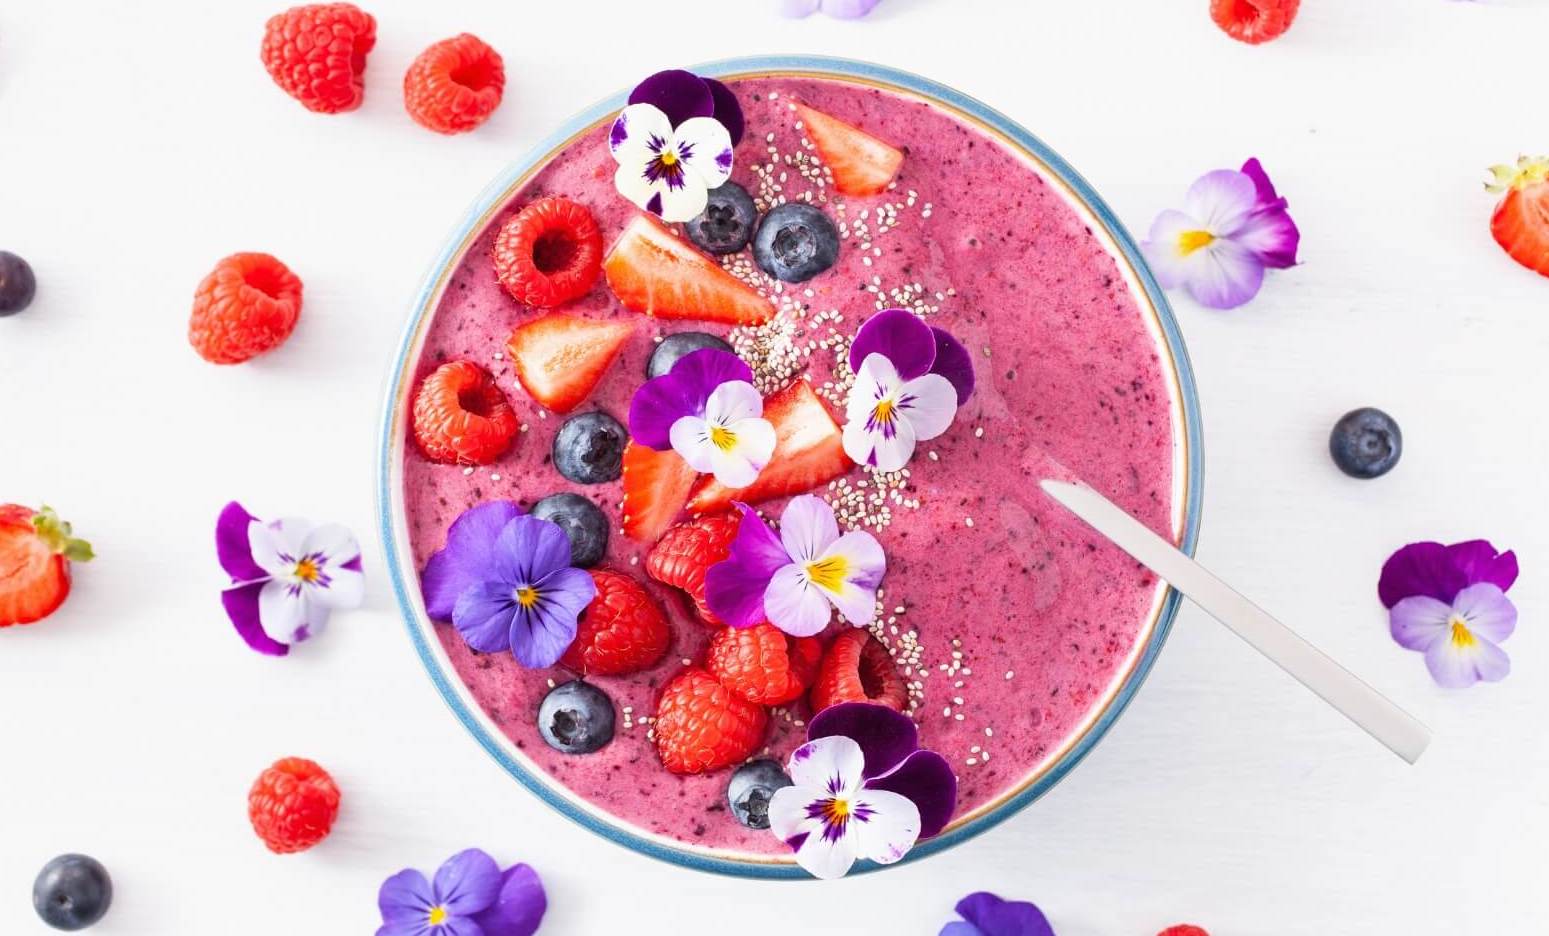 Aesthetic smoothie bowl adorned with colorful edible flowers and mixed berries